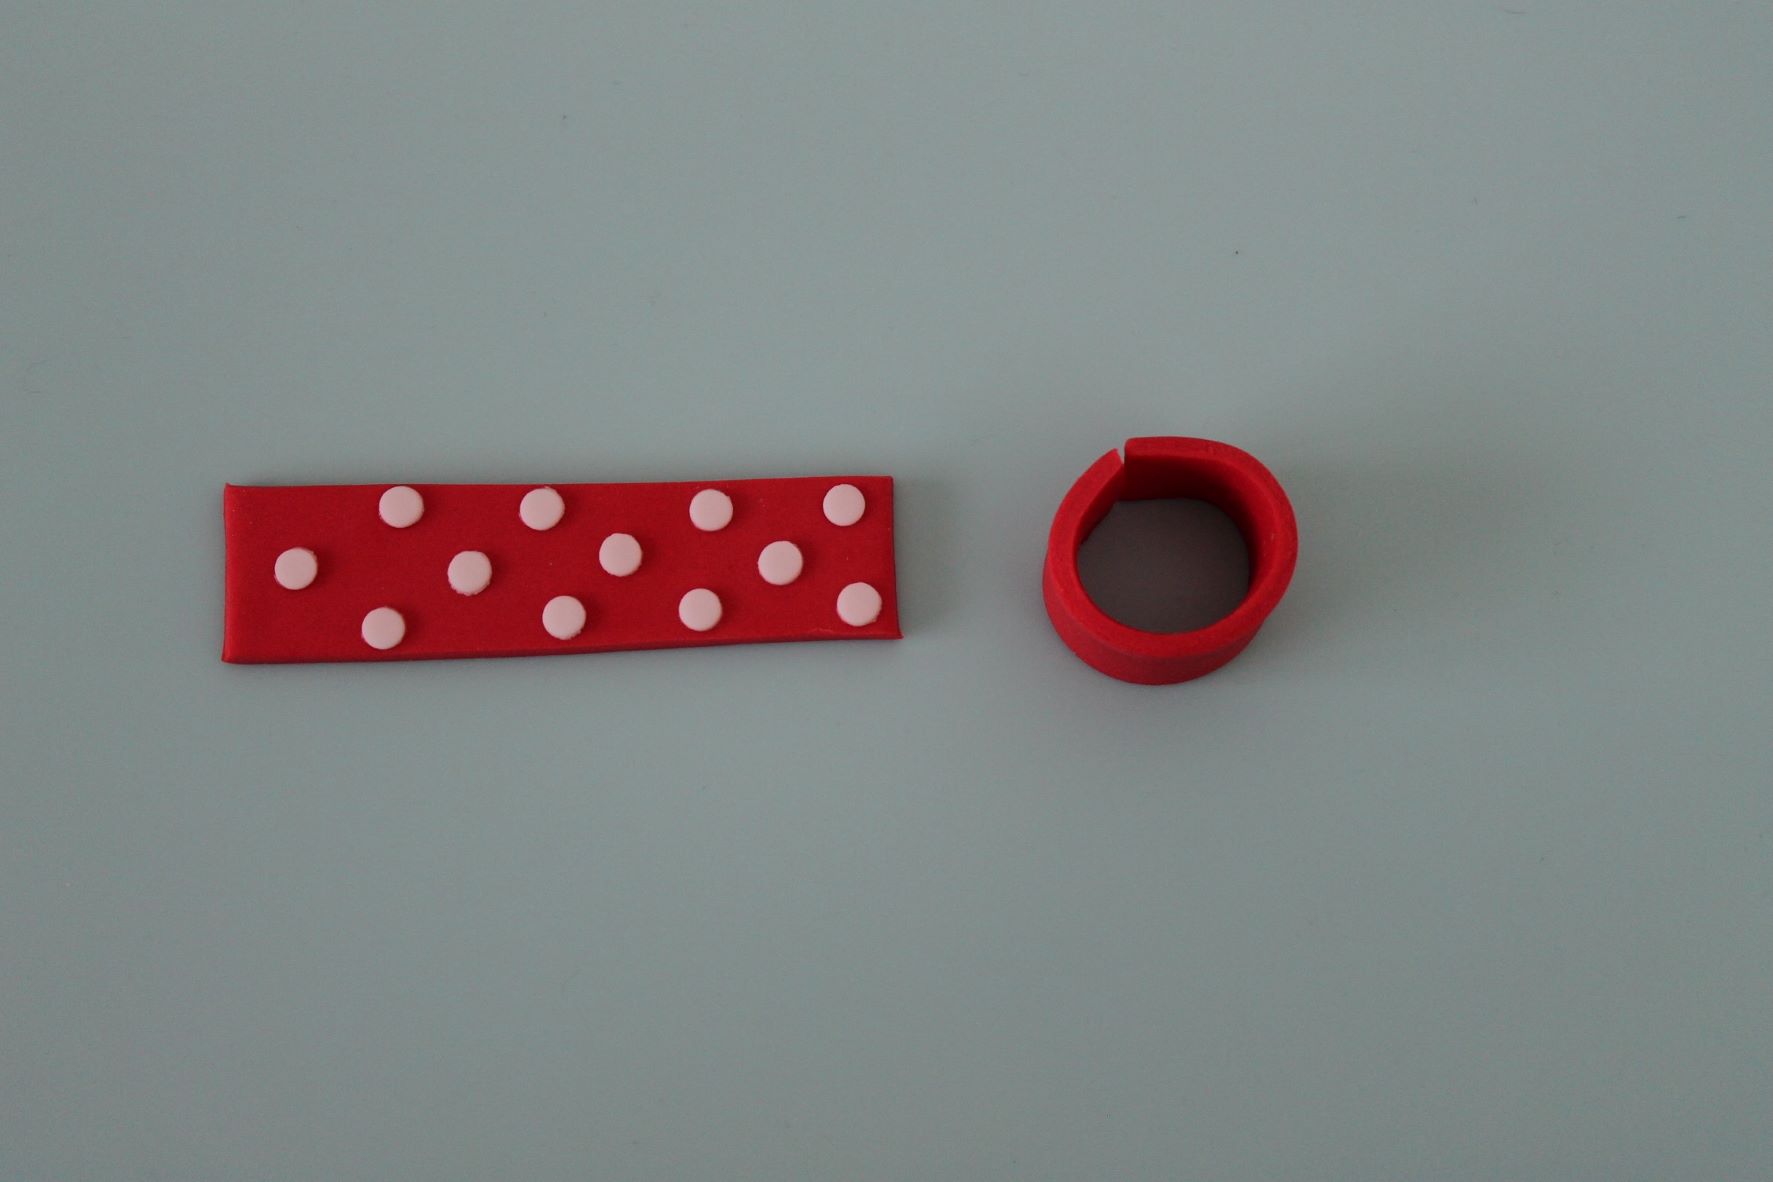 To make the present, colour a small amount of modelling paste red and roll it out to a couple of millimetres thick. Using a small round plunger cutter, cut out circles of thinly rolled white modelling paste and stick onto the red strip. Curl the strip to create a cylinder. Roll a thicker piece of red and cut a larger circle out for the present lid. Cover in white dots to match the present.